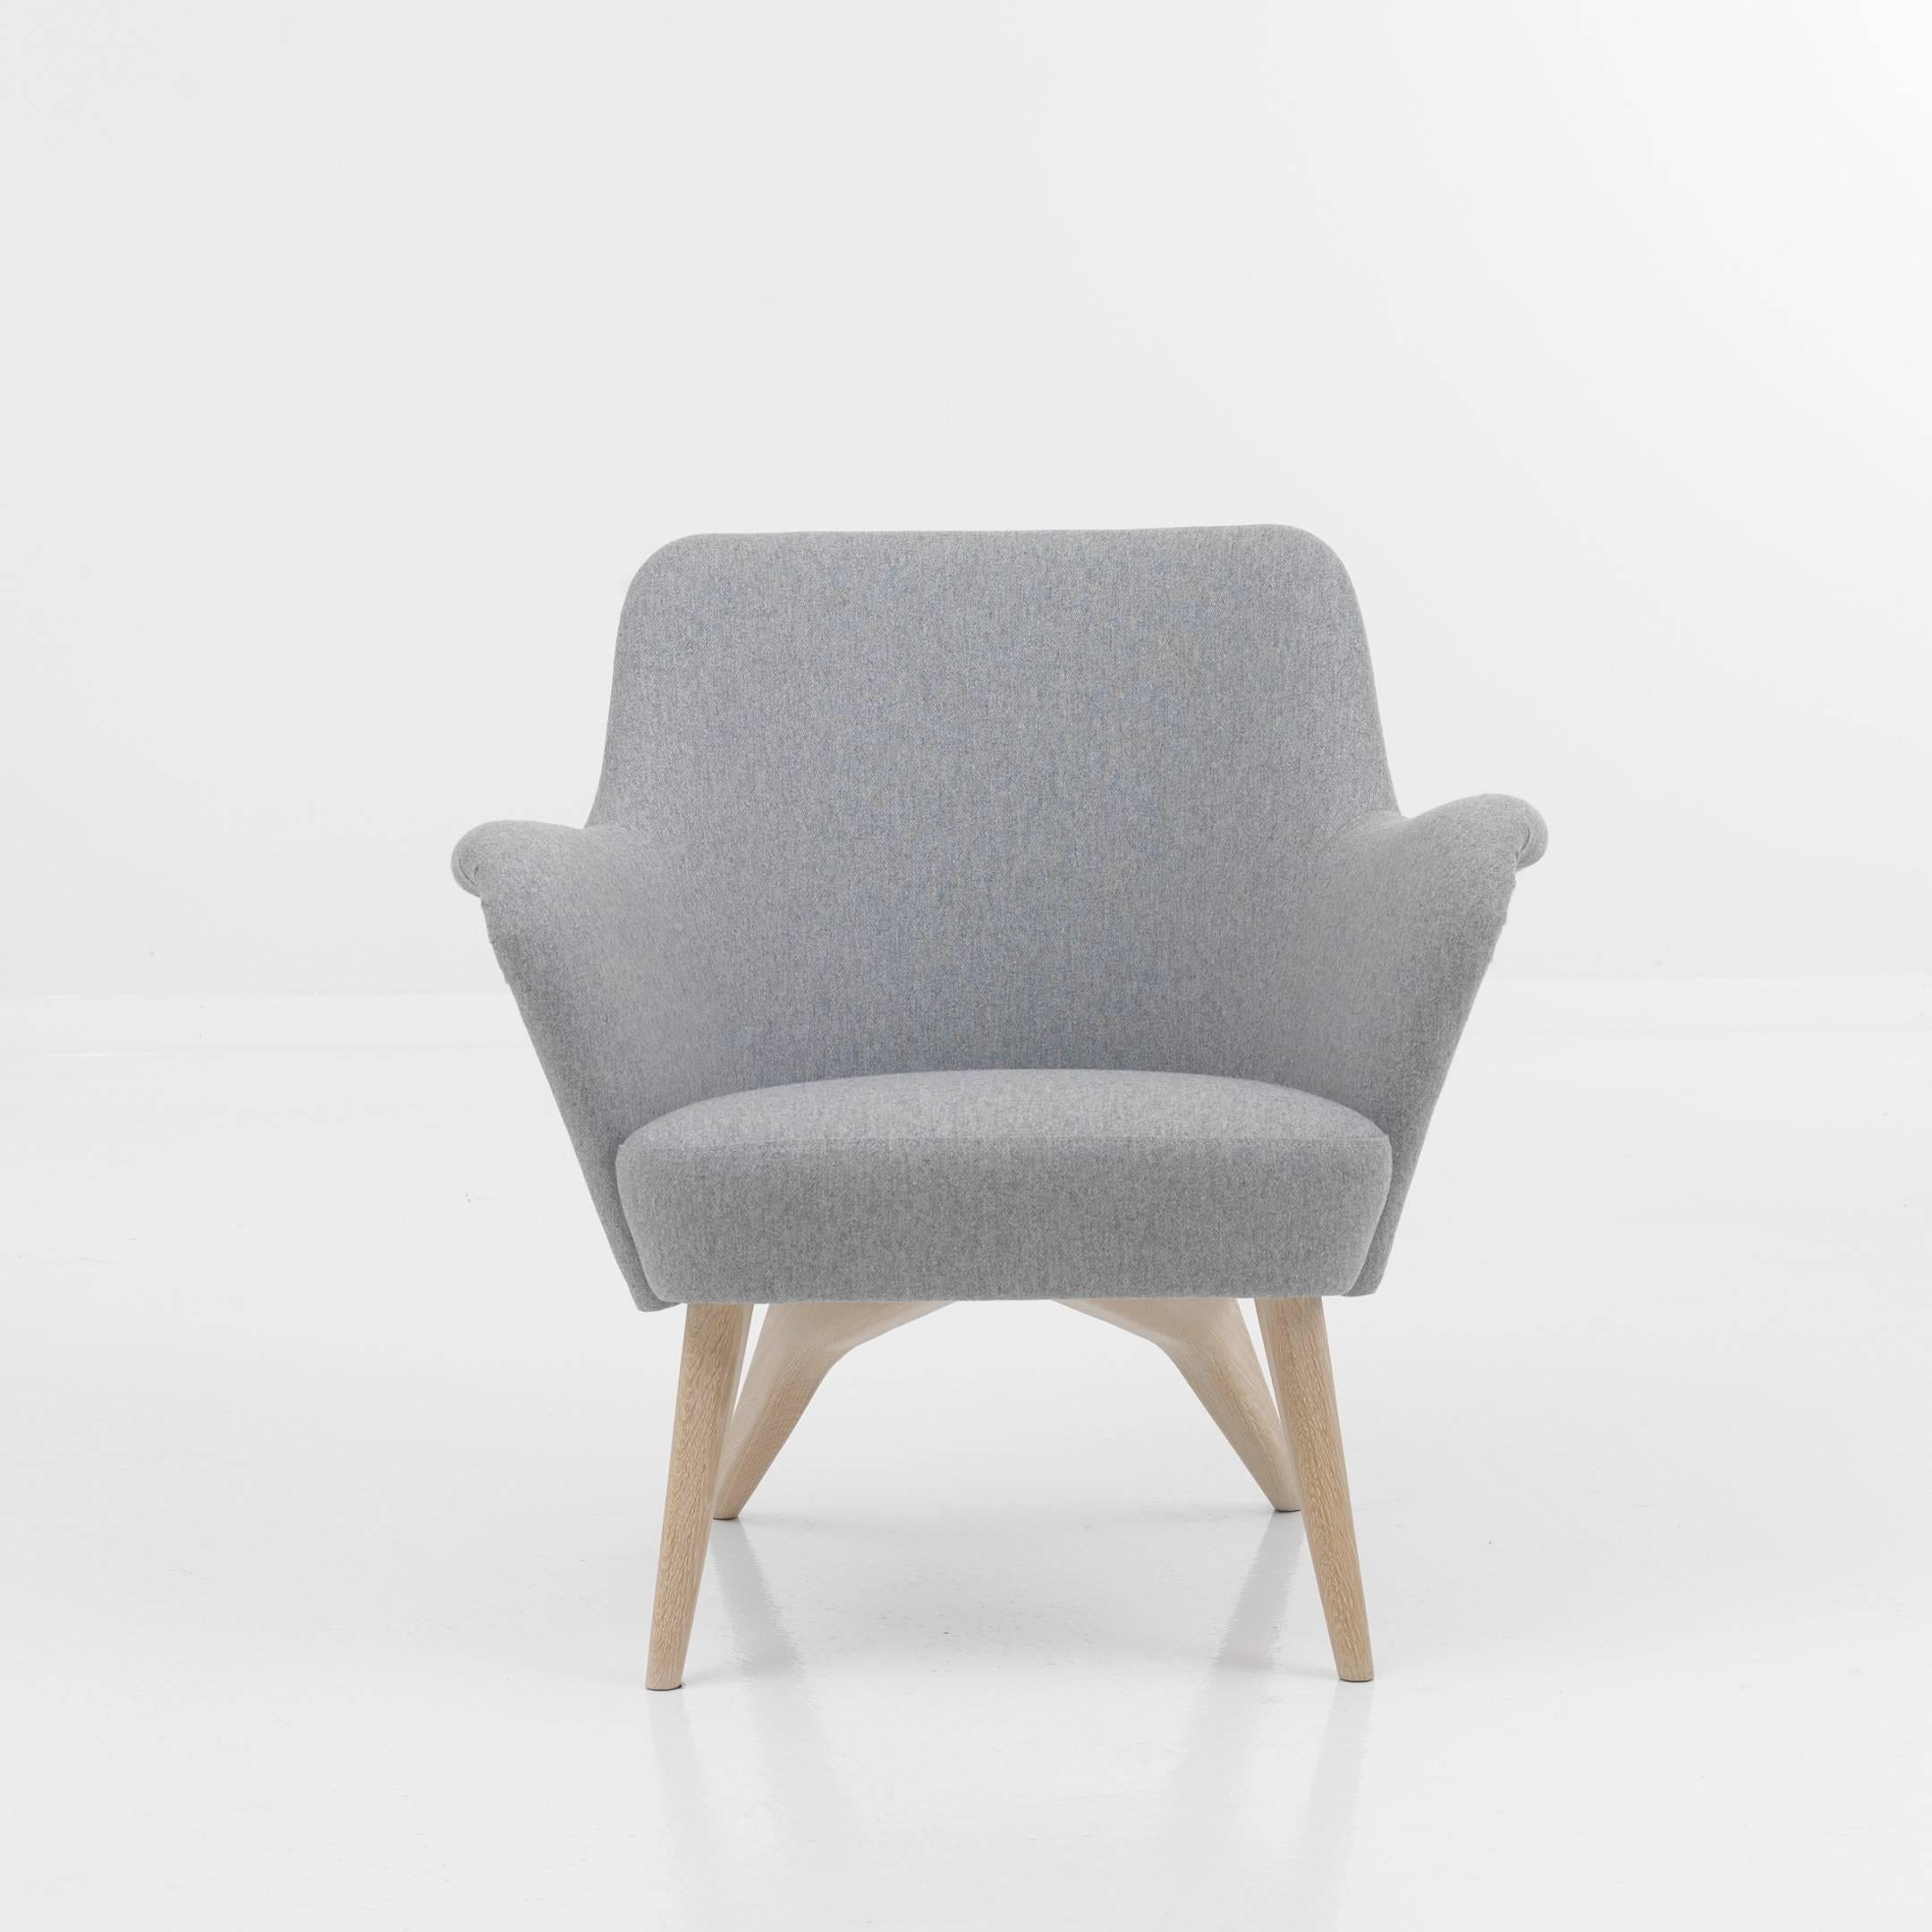 Pedro armchair is designed by Carl Gustav Hiort af Ornäs in 1952. The cozy curving forms of the 1950s are to be found in the Pedro armchair. Along with creating forms of beauty, Hiort af Ornäs also made sure that the chairs provided a good,